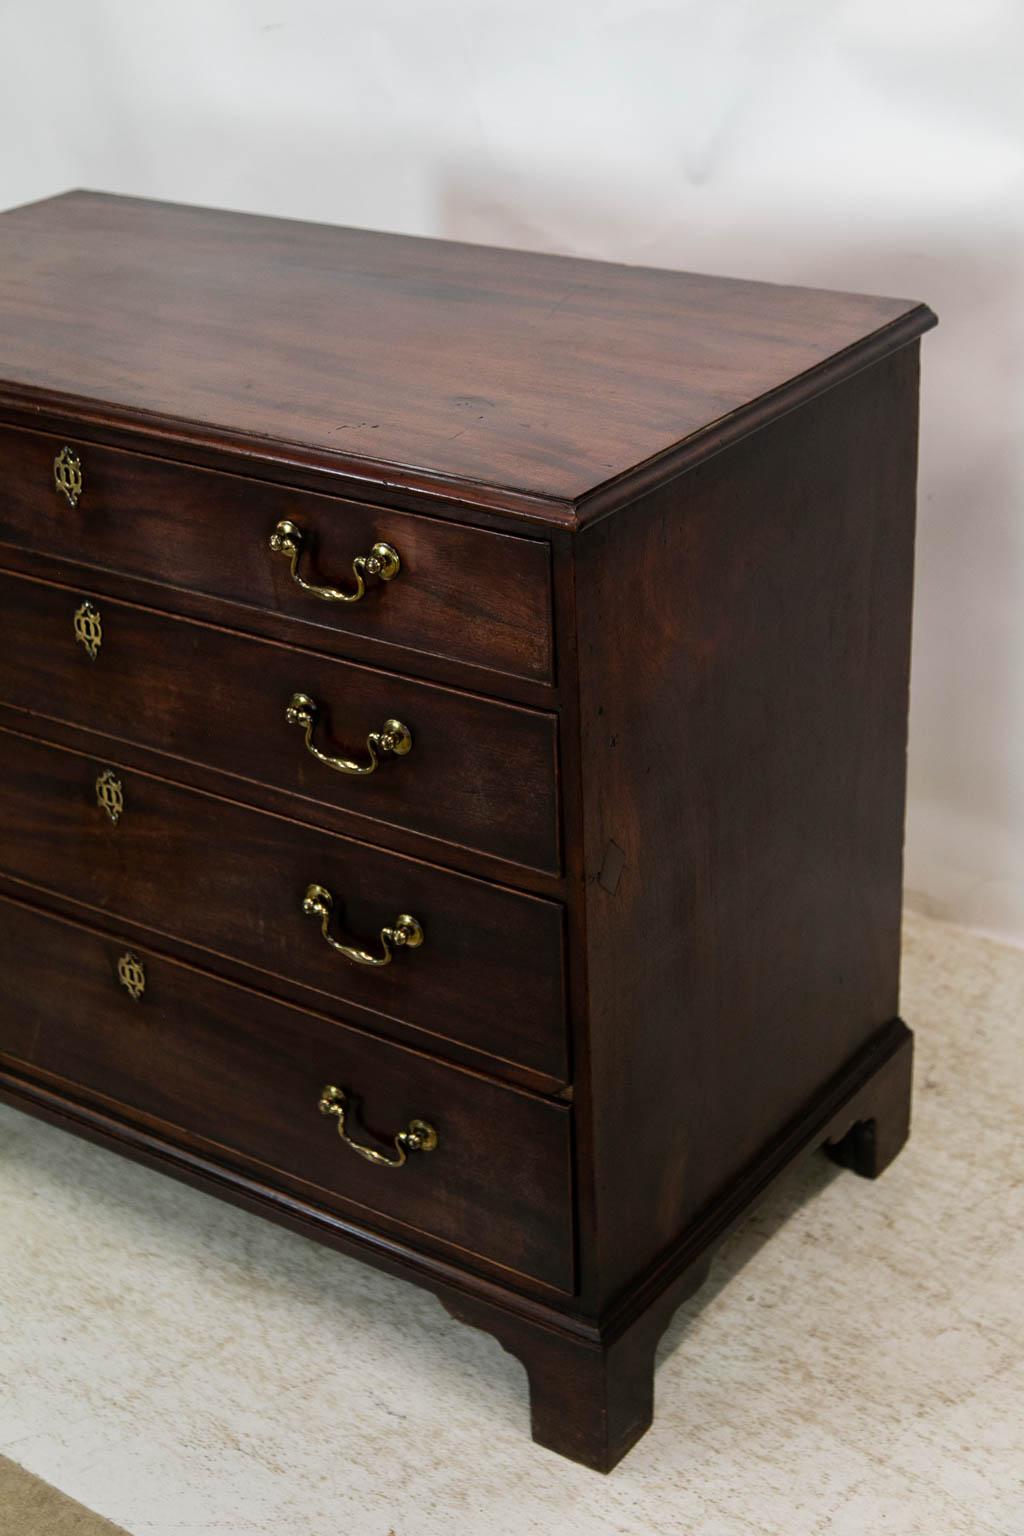 Late 18th Century English Mahogany Chippendale Chest